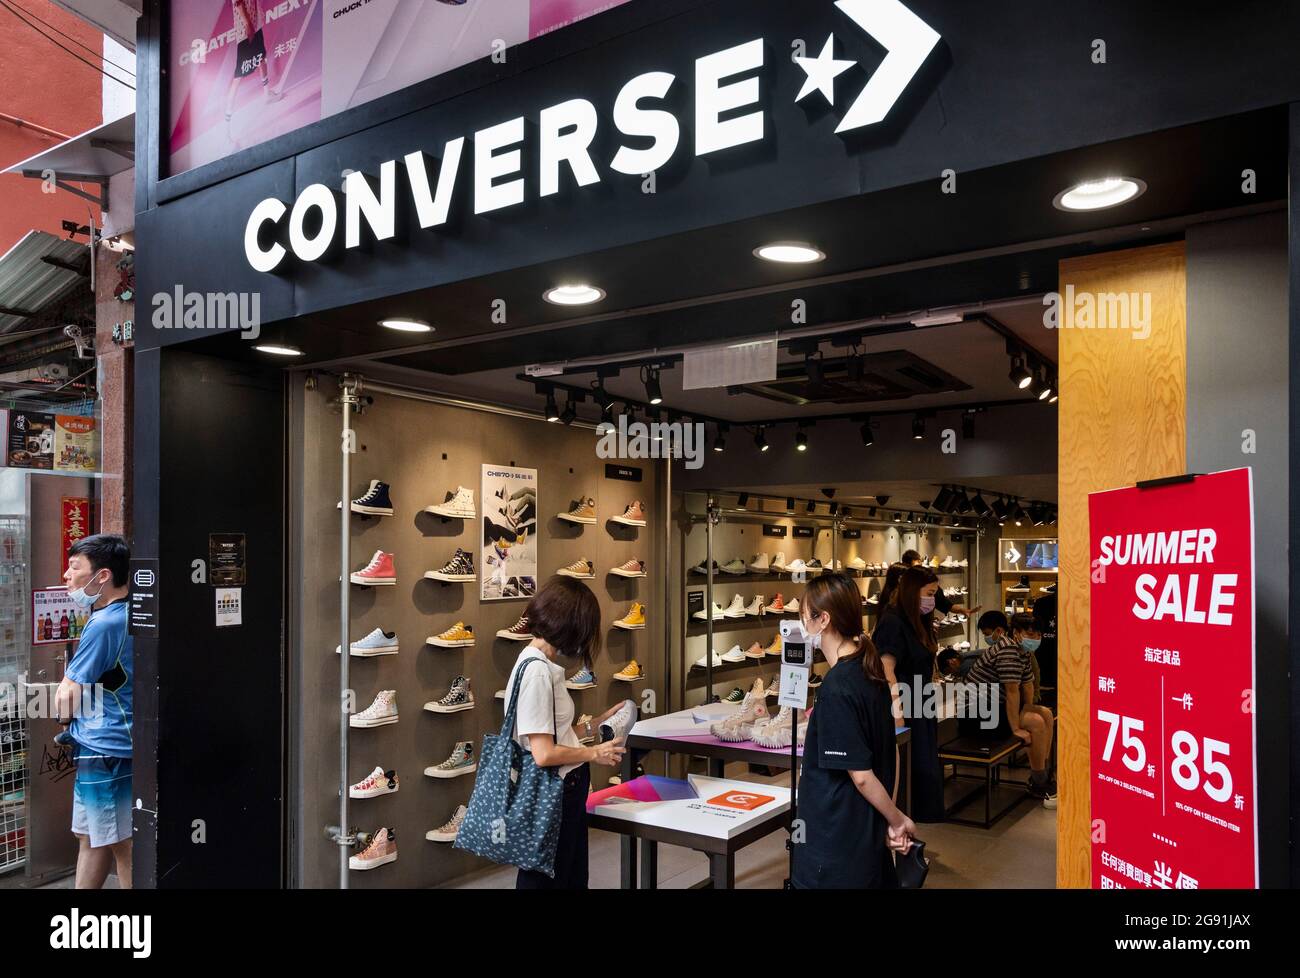 Page 3 - Converse Shop High Resolution Stock Photography and Images - Alamy